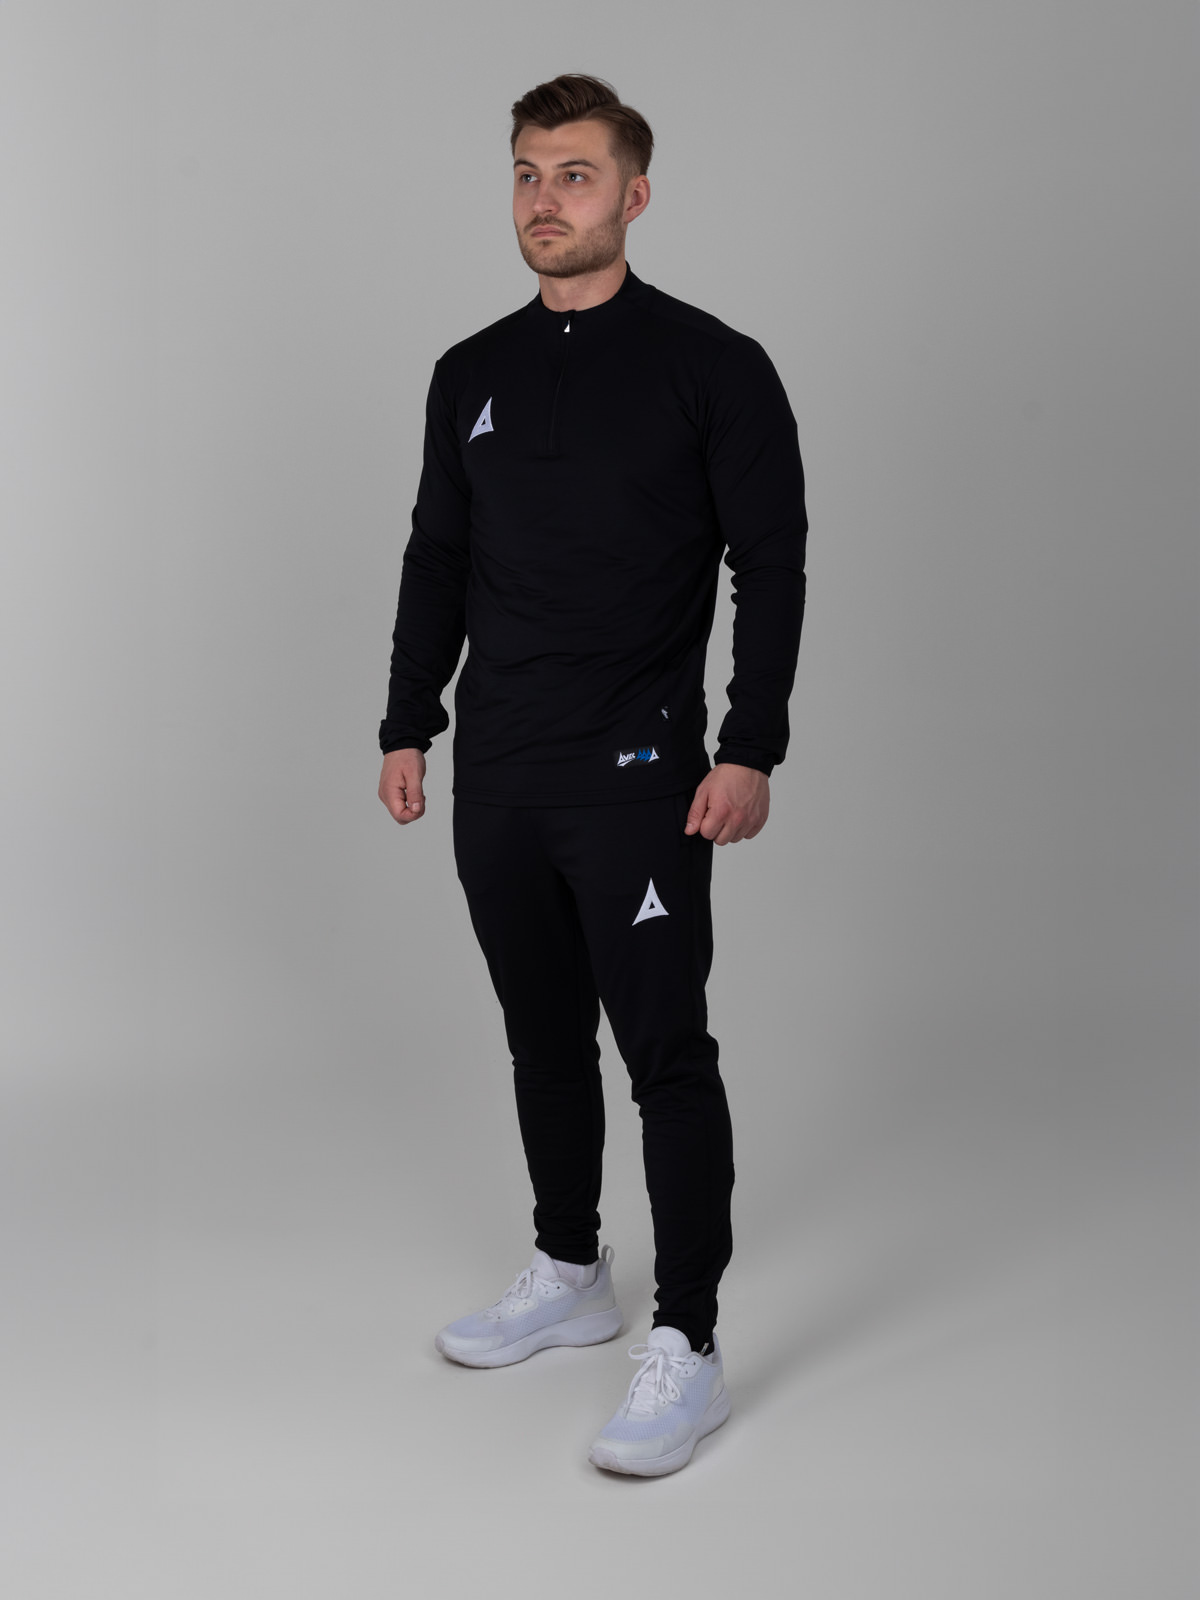 model is wearing a plain black tracksuit, which items are sold as seperates